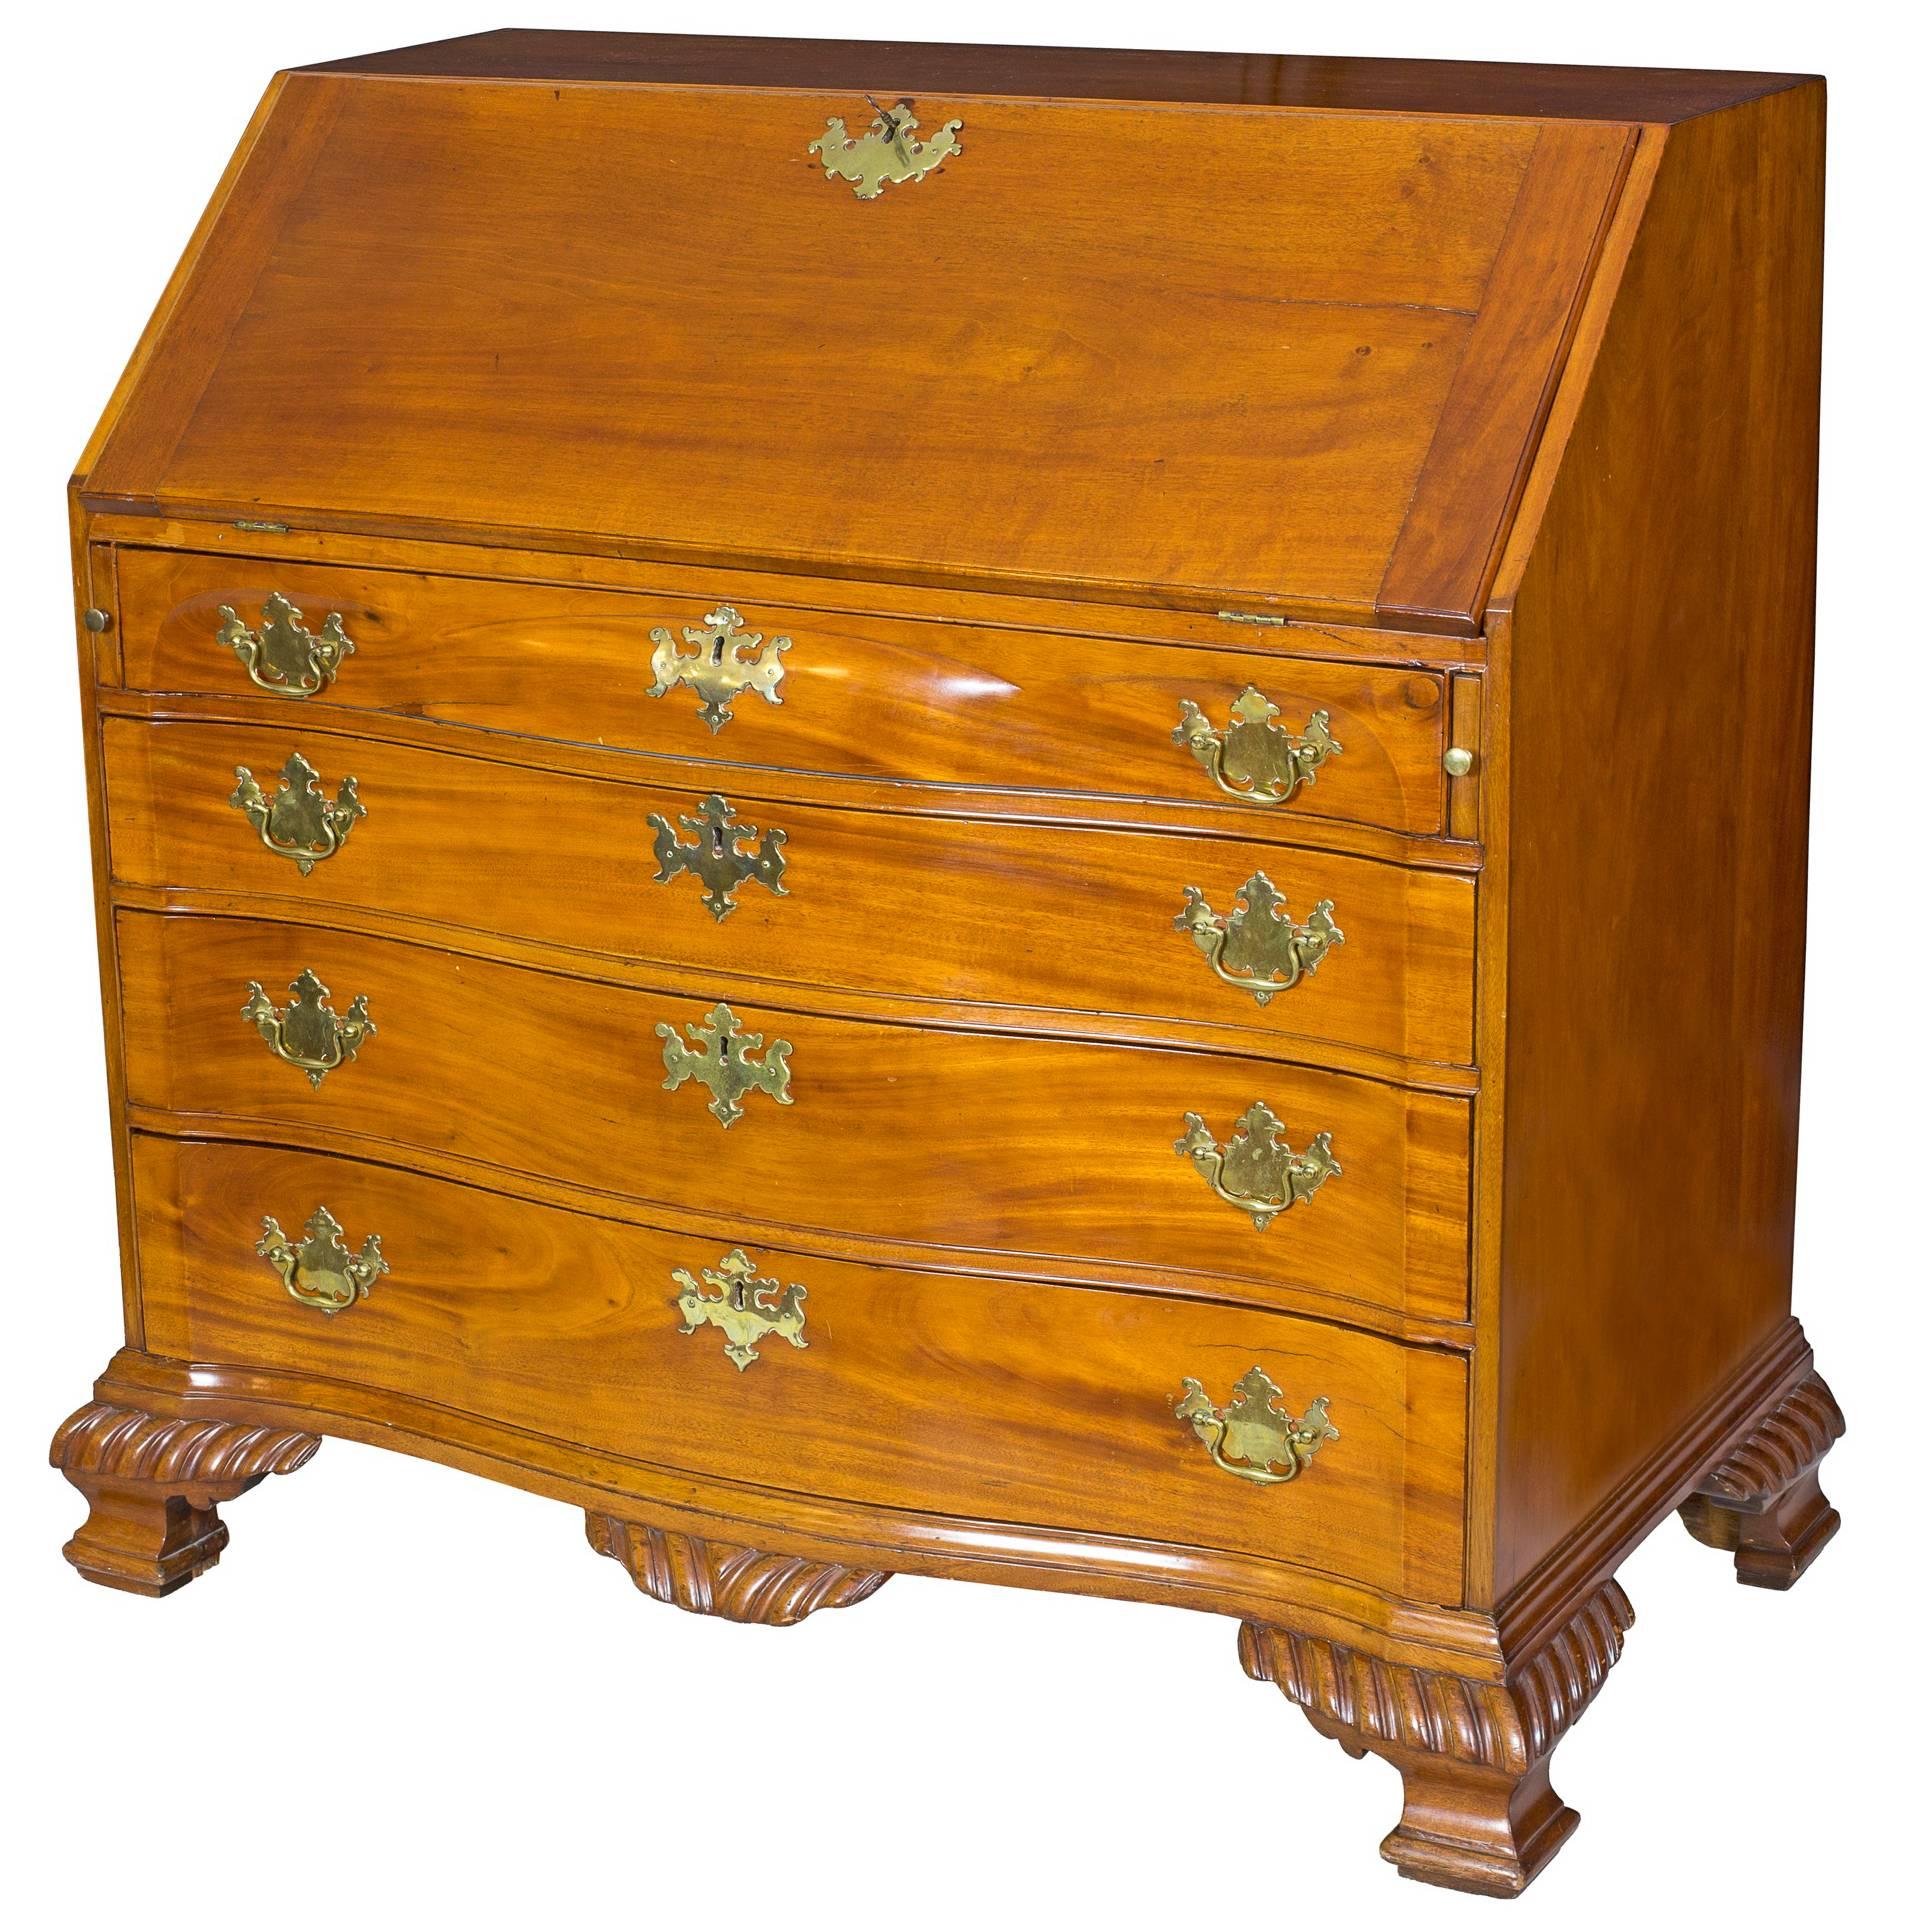 Chippendale Mahogany Slant-Lid Desk with a Blocked Serpentine Front, MA For Sale